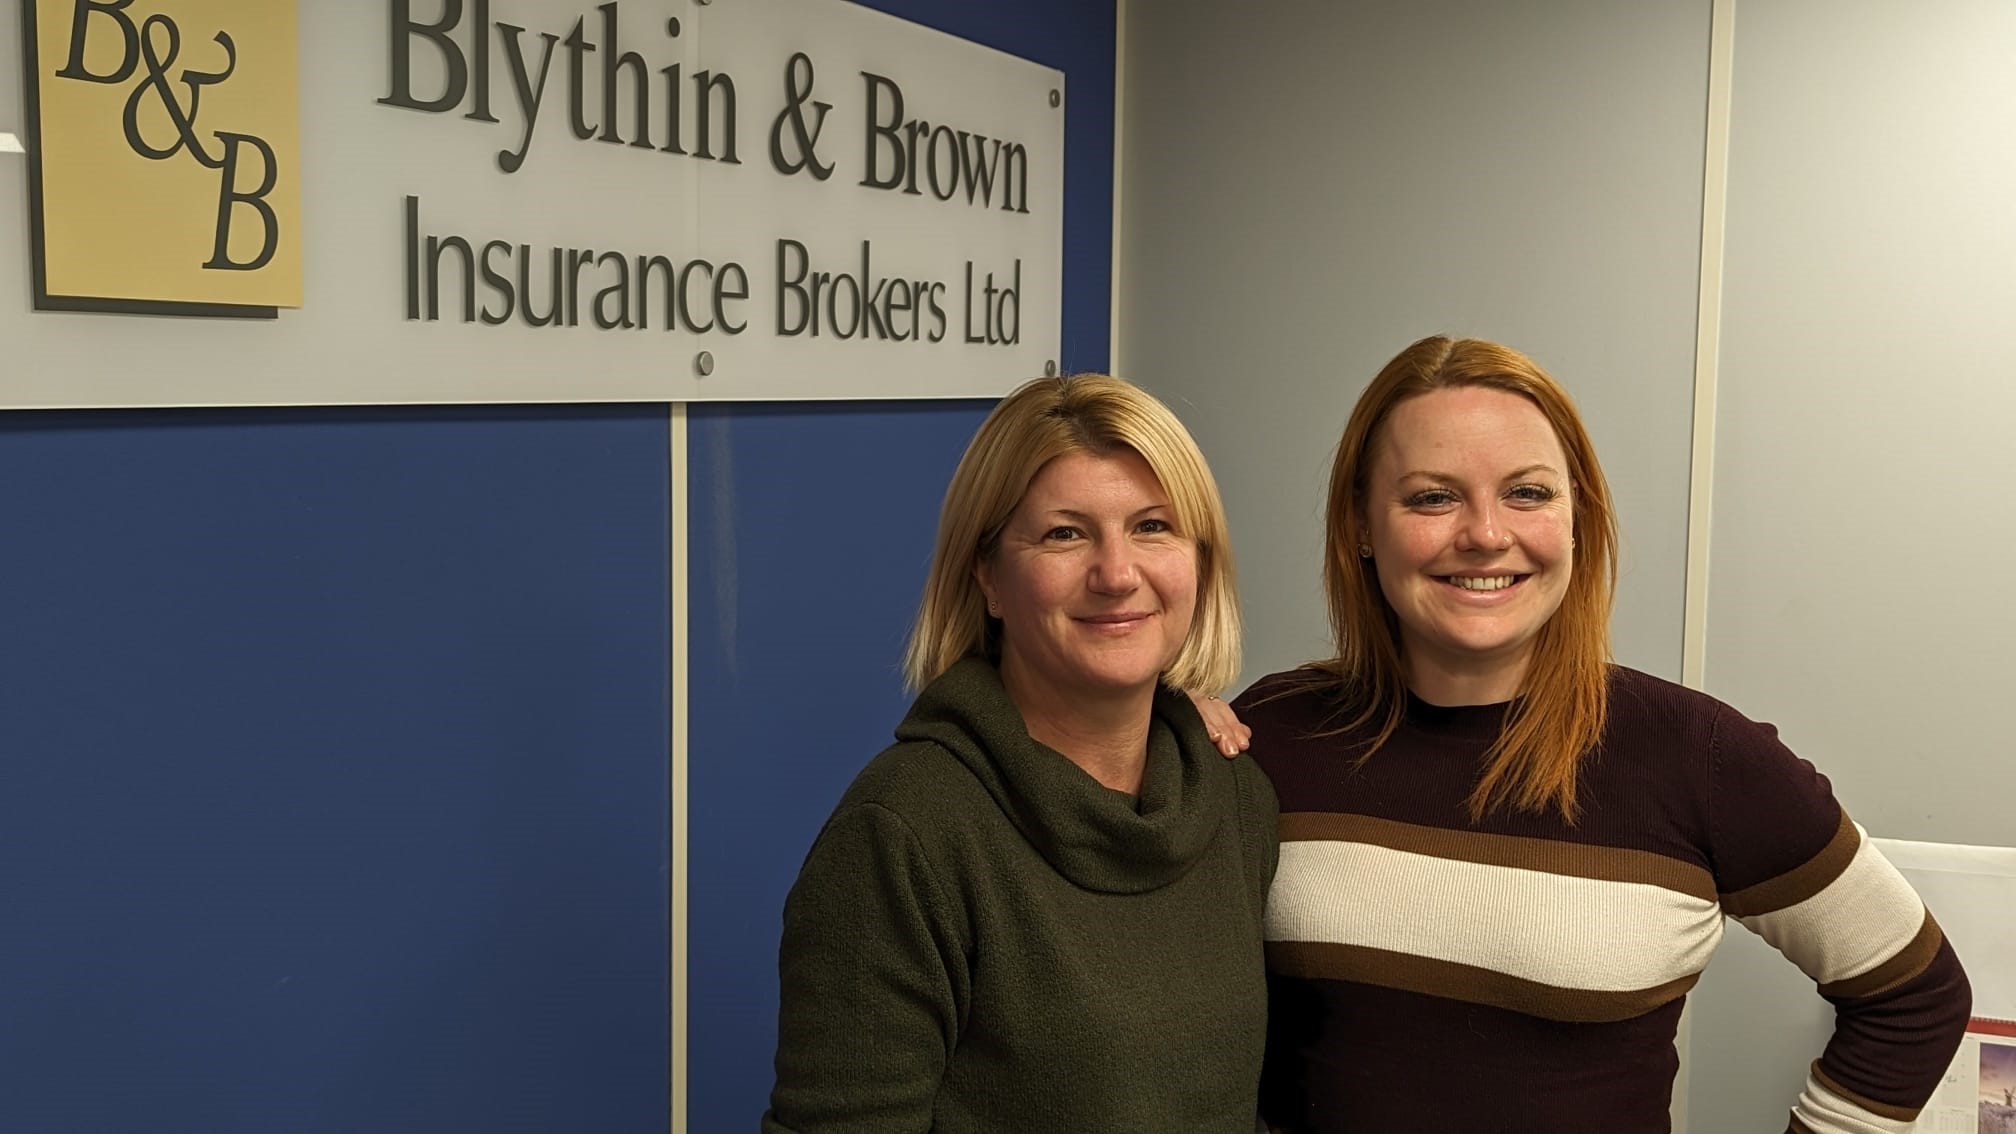 Blythin & Brown has boosted its Business Development and Account Management teams following the appointment of Stephanie Issit and Gemma Bradshaw.